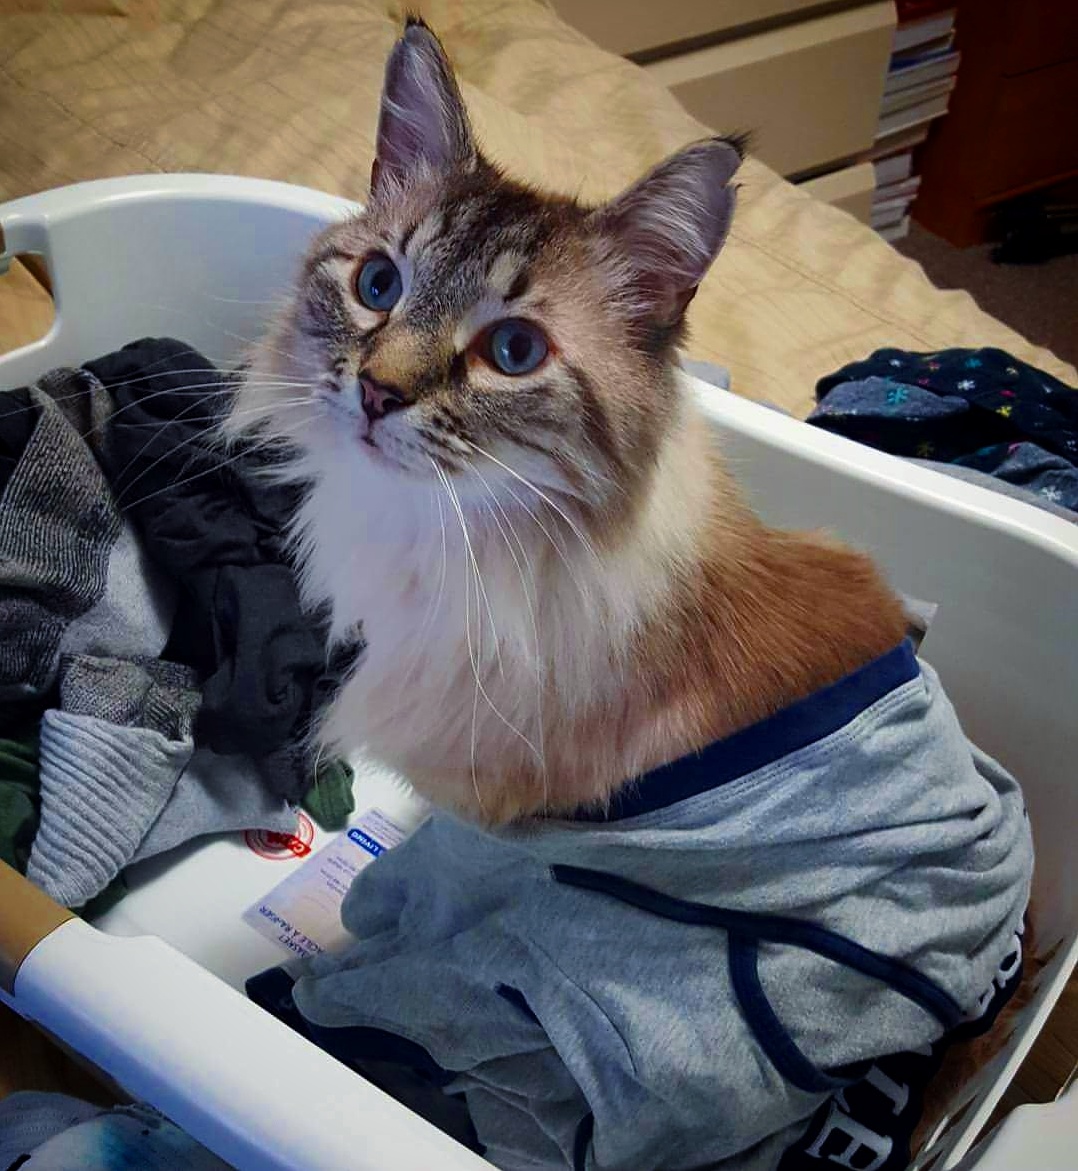 Helping with laundry